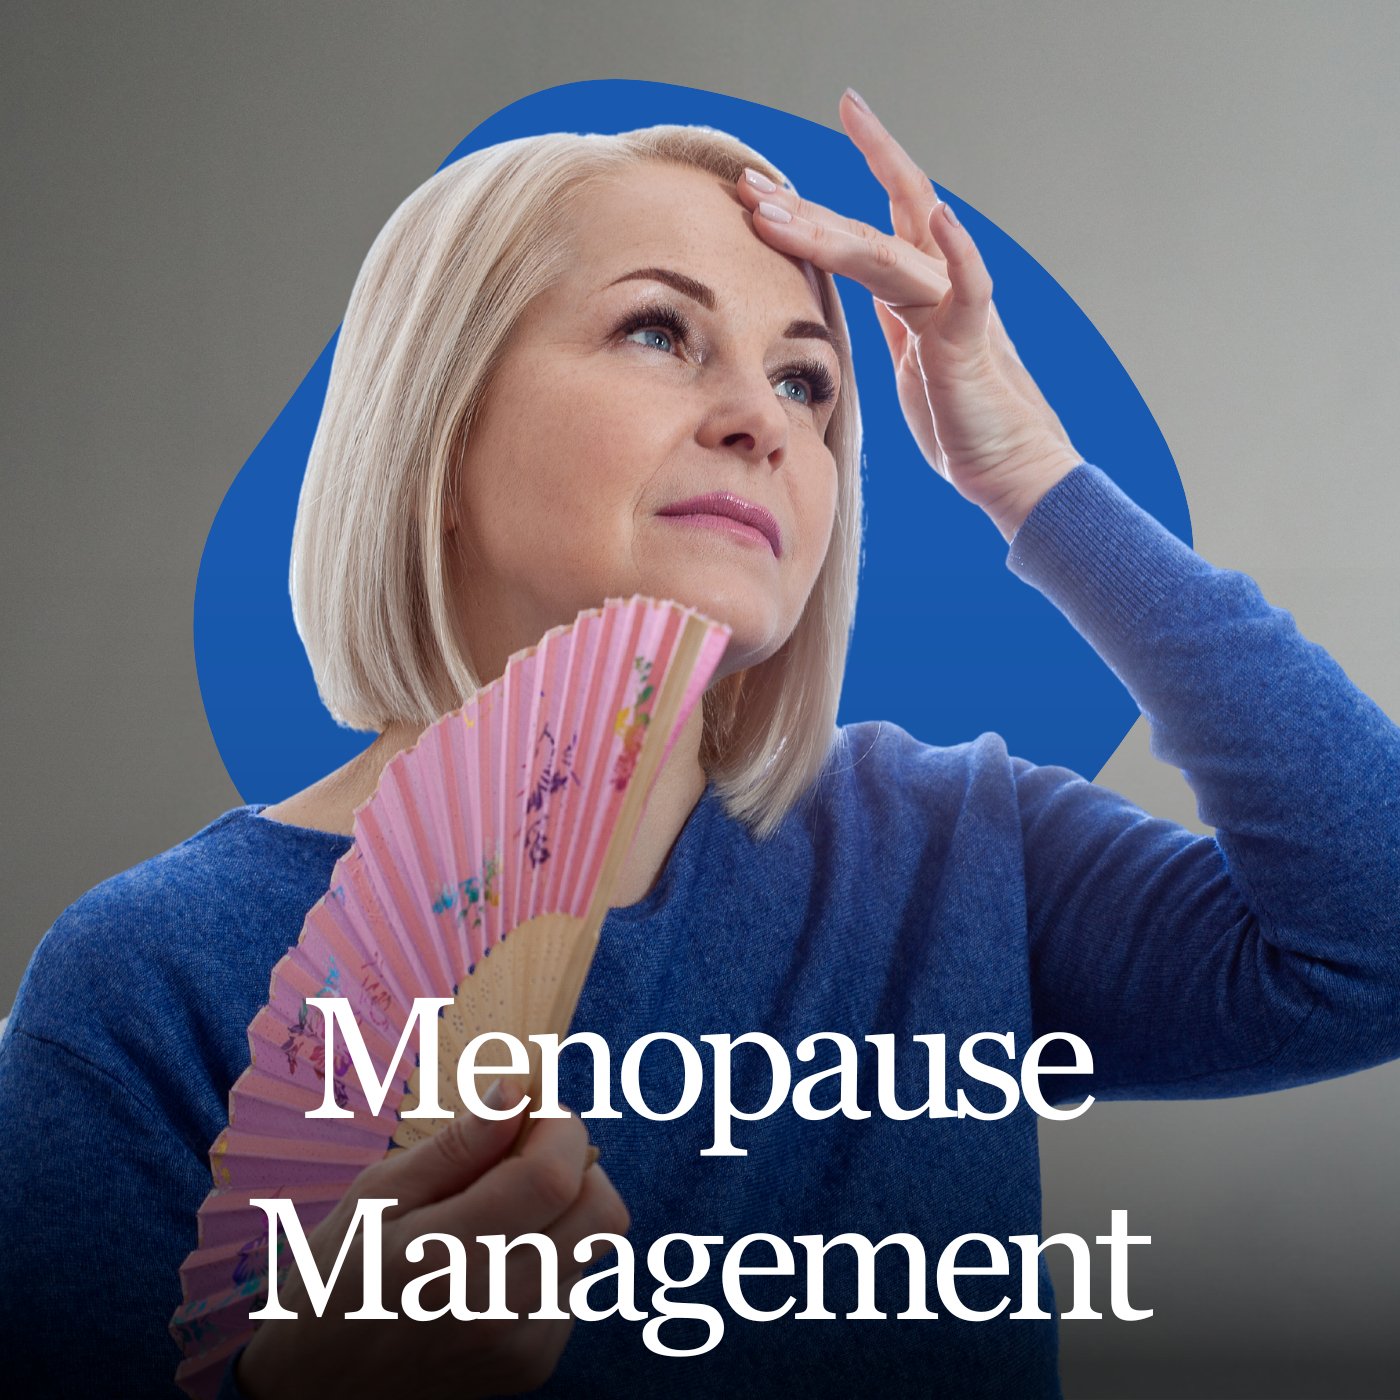 Menopause Management Hypnotherapy Bundle (12 Sessions) - Clearmindshypnotherapy